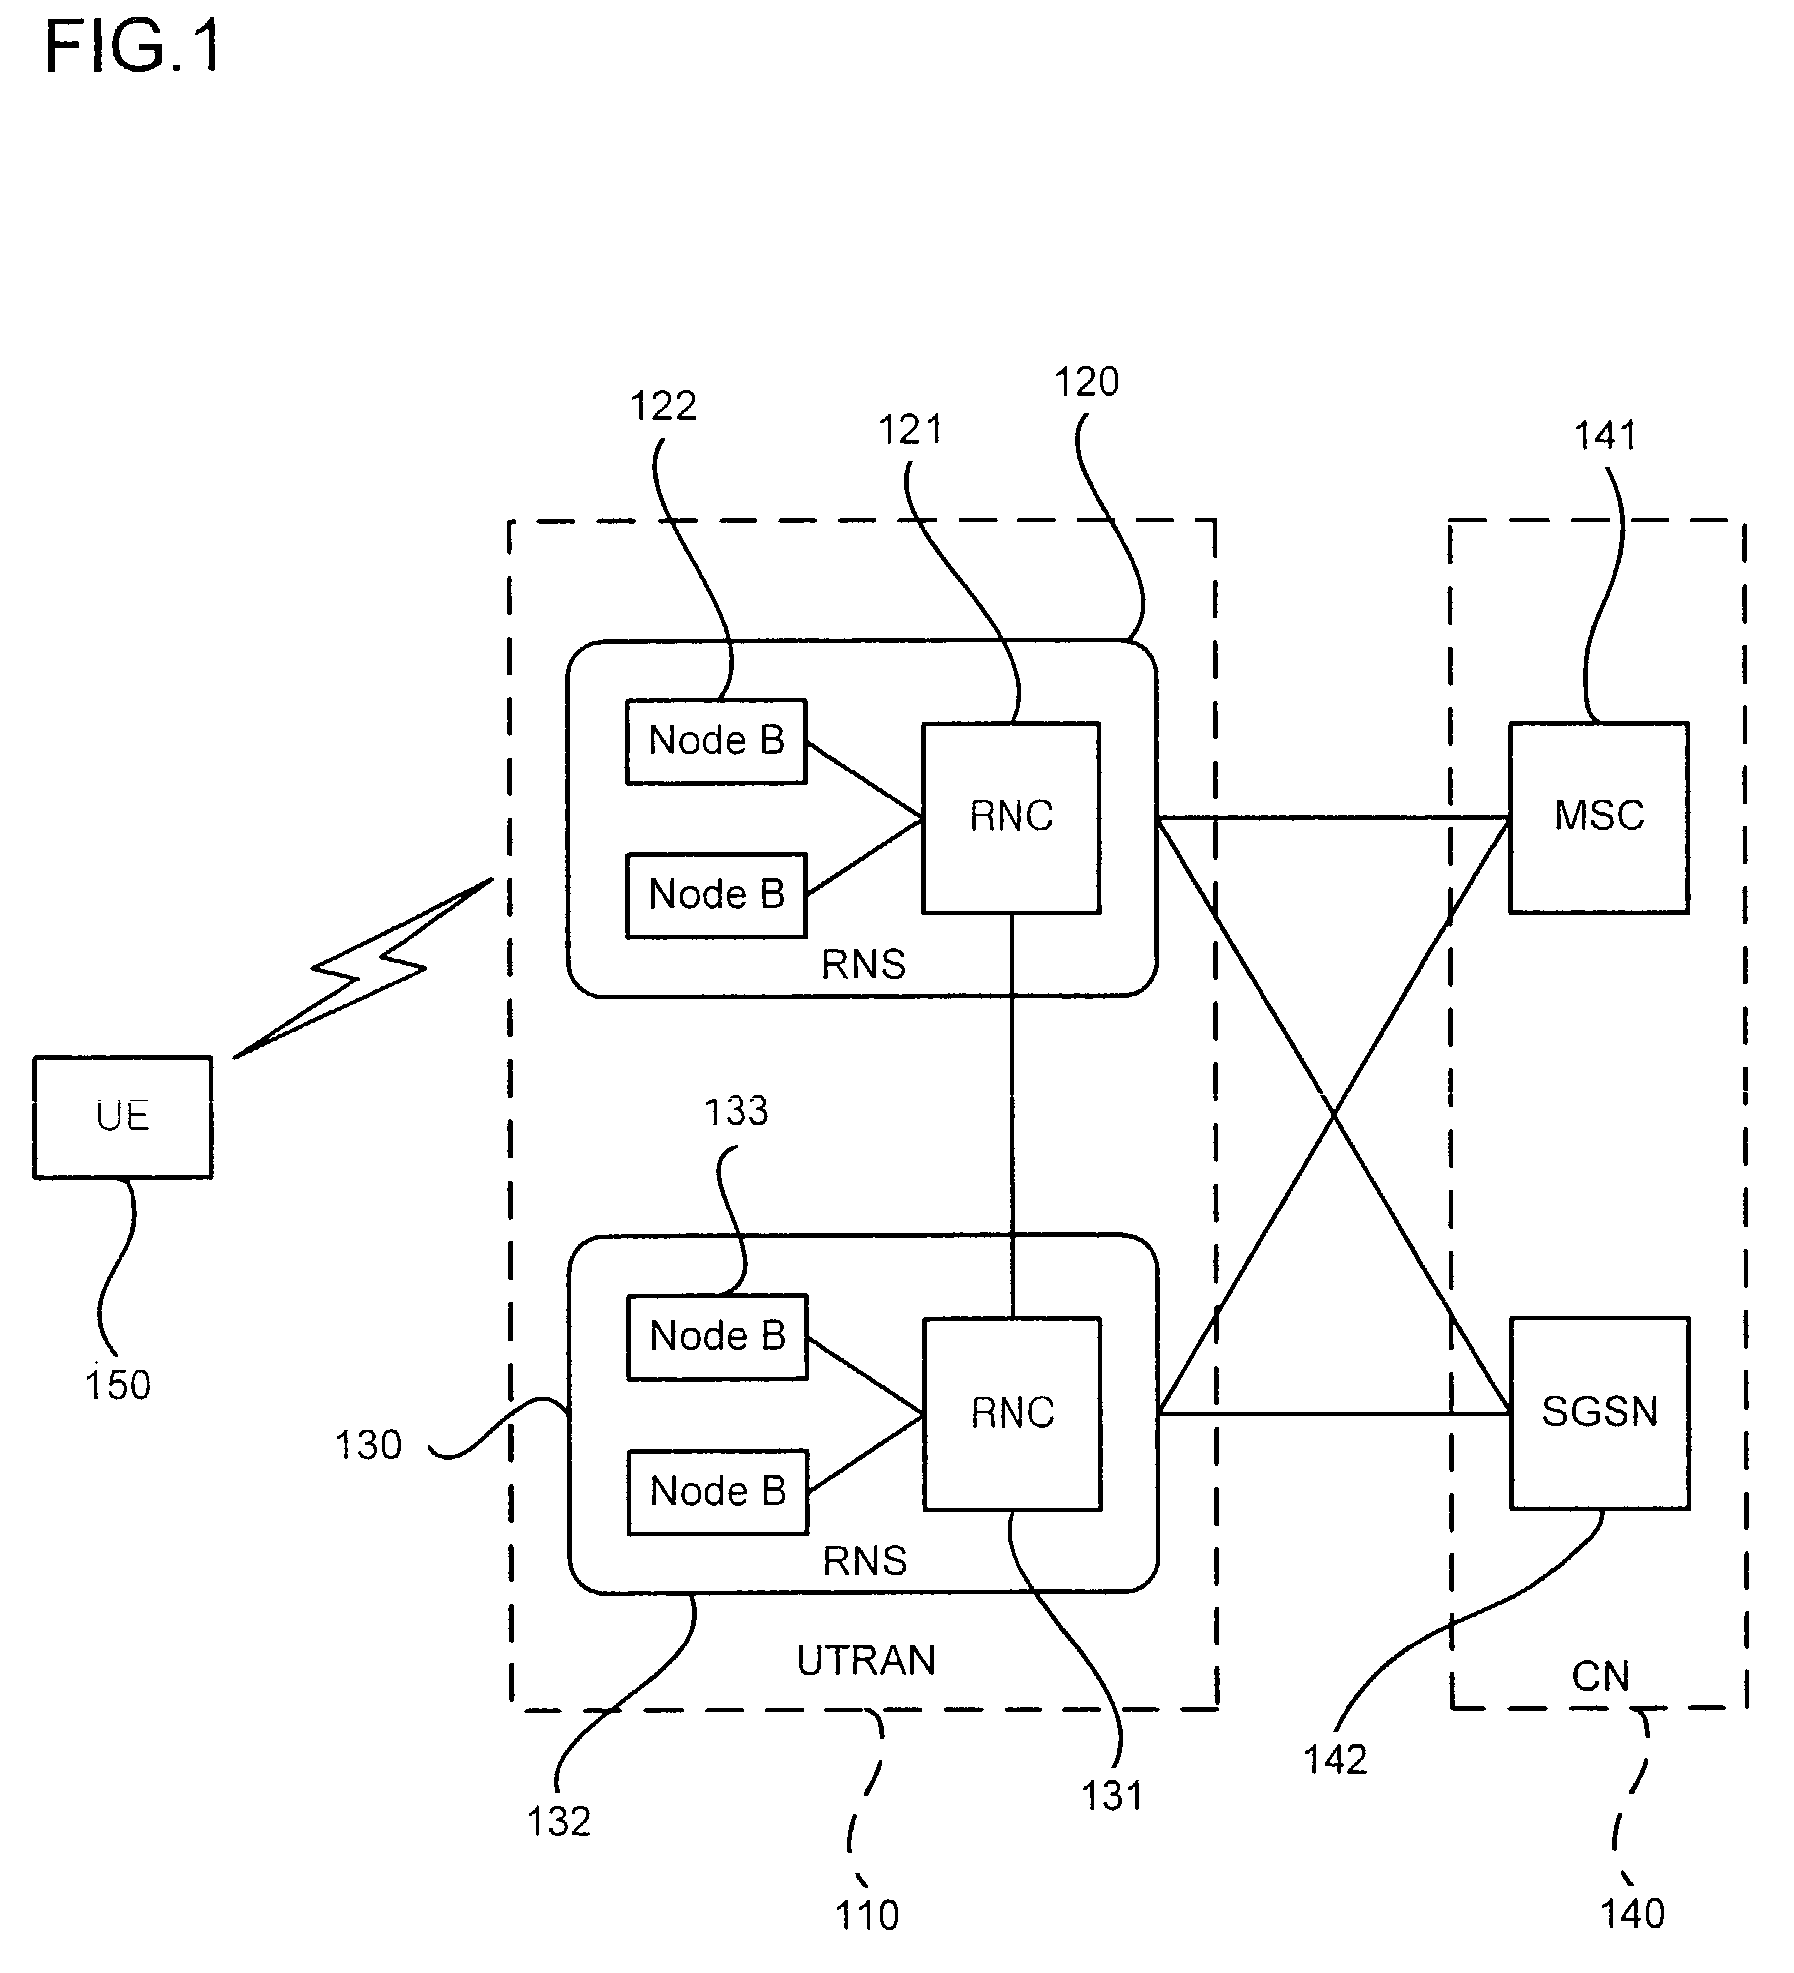 Packet transmission scheduling technique